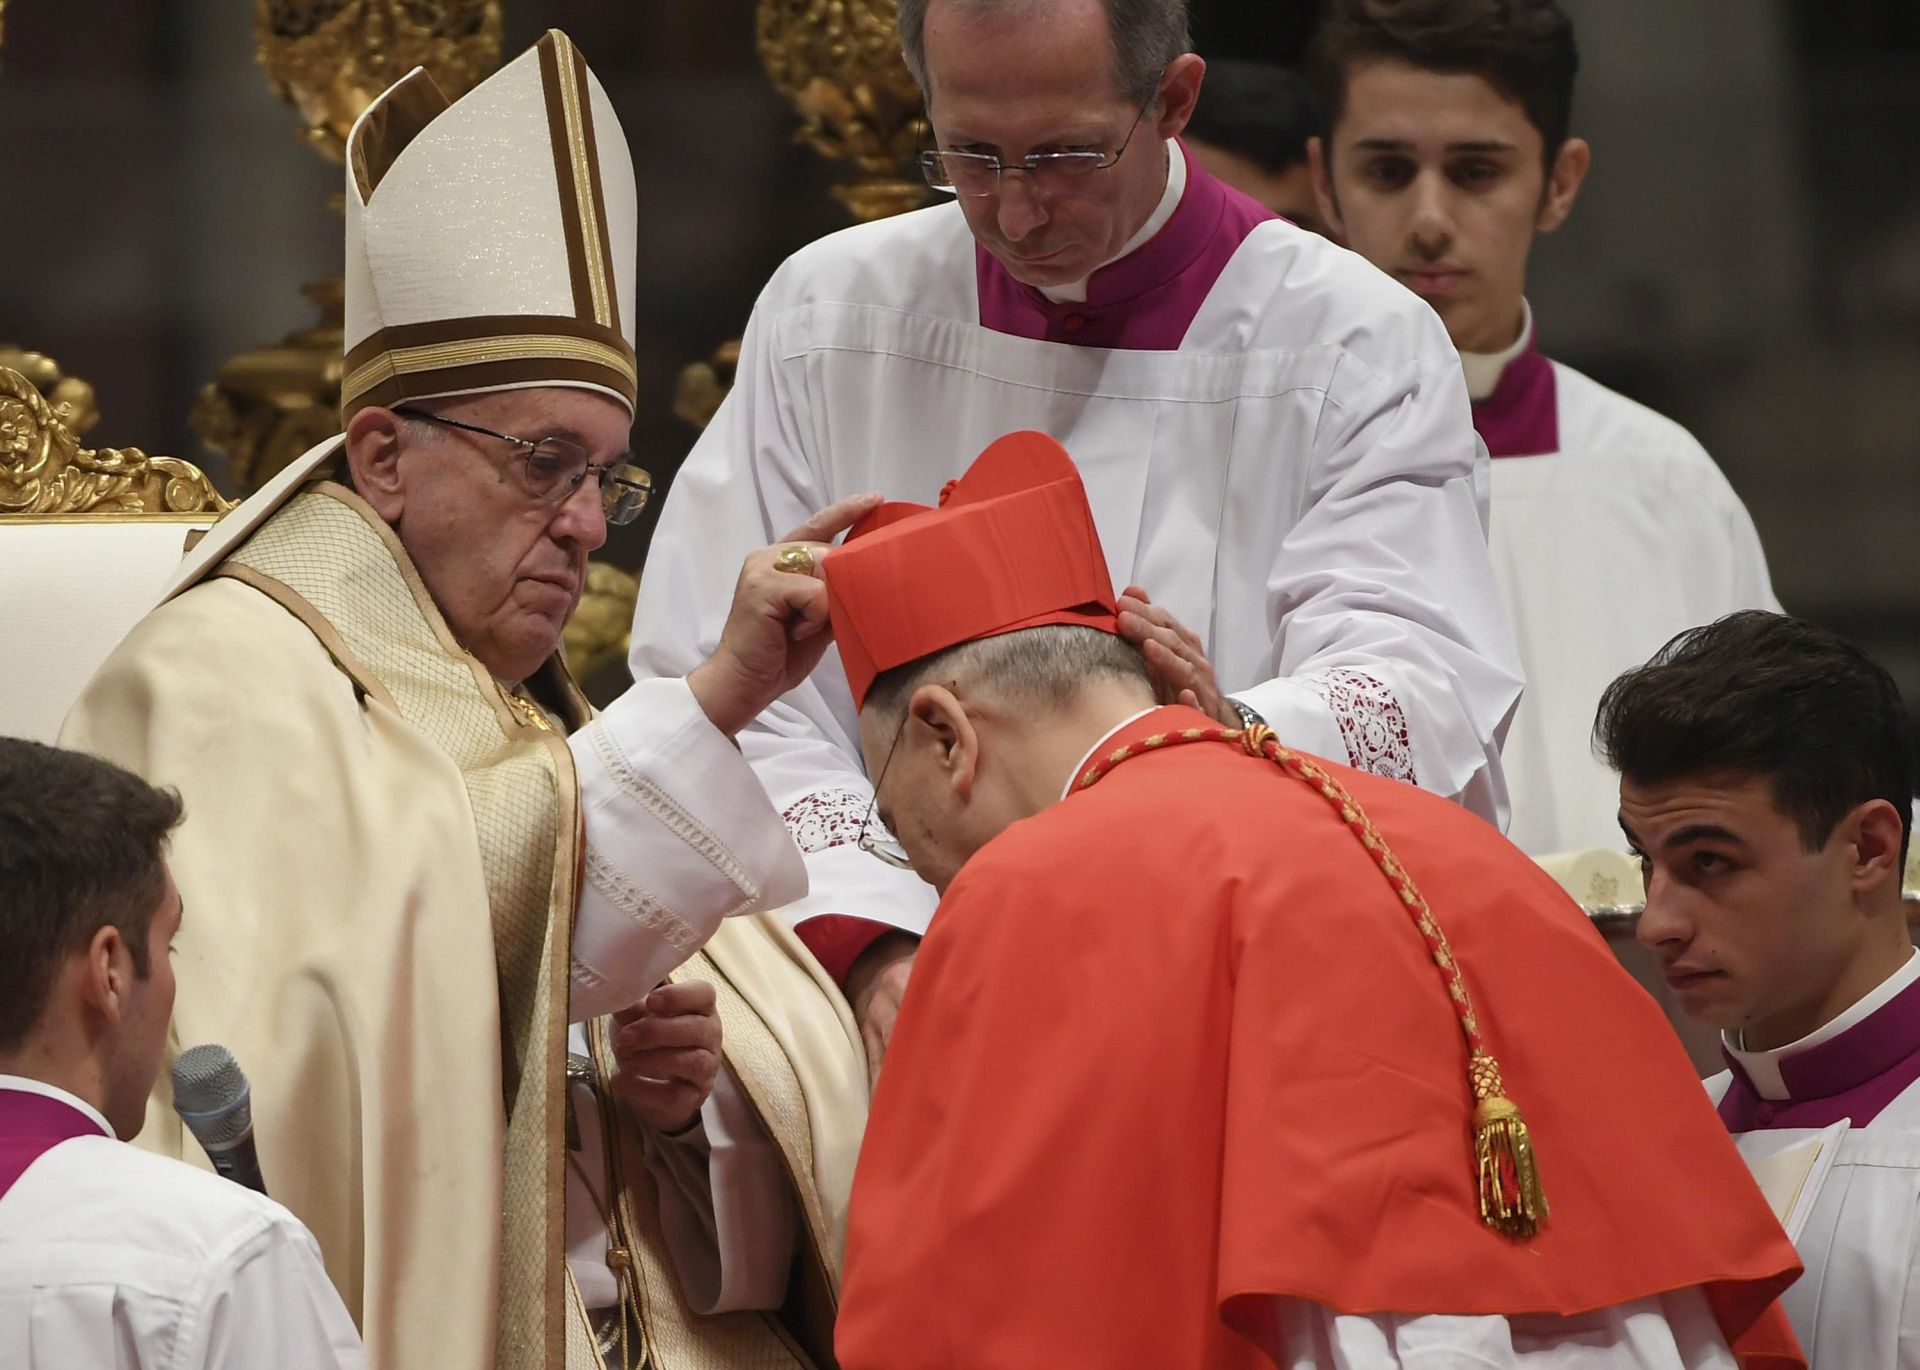 epa05637895 Pope Francis (L) places the red three-cornered biretta hat on the head of new Cardinal Carlos Osoro Sierra (R), Archbishop of Madrid, during the Consistory ceremony in Vatican, 19 November 2016. Pope Francis has named 17 new cardinals, 13 of them under age 80 and thus eligible to vote in a conclave to elect his successor.  EPA/MAURIZIO BRAMBATTI